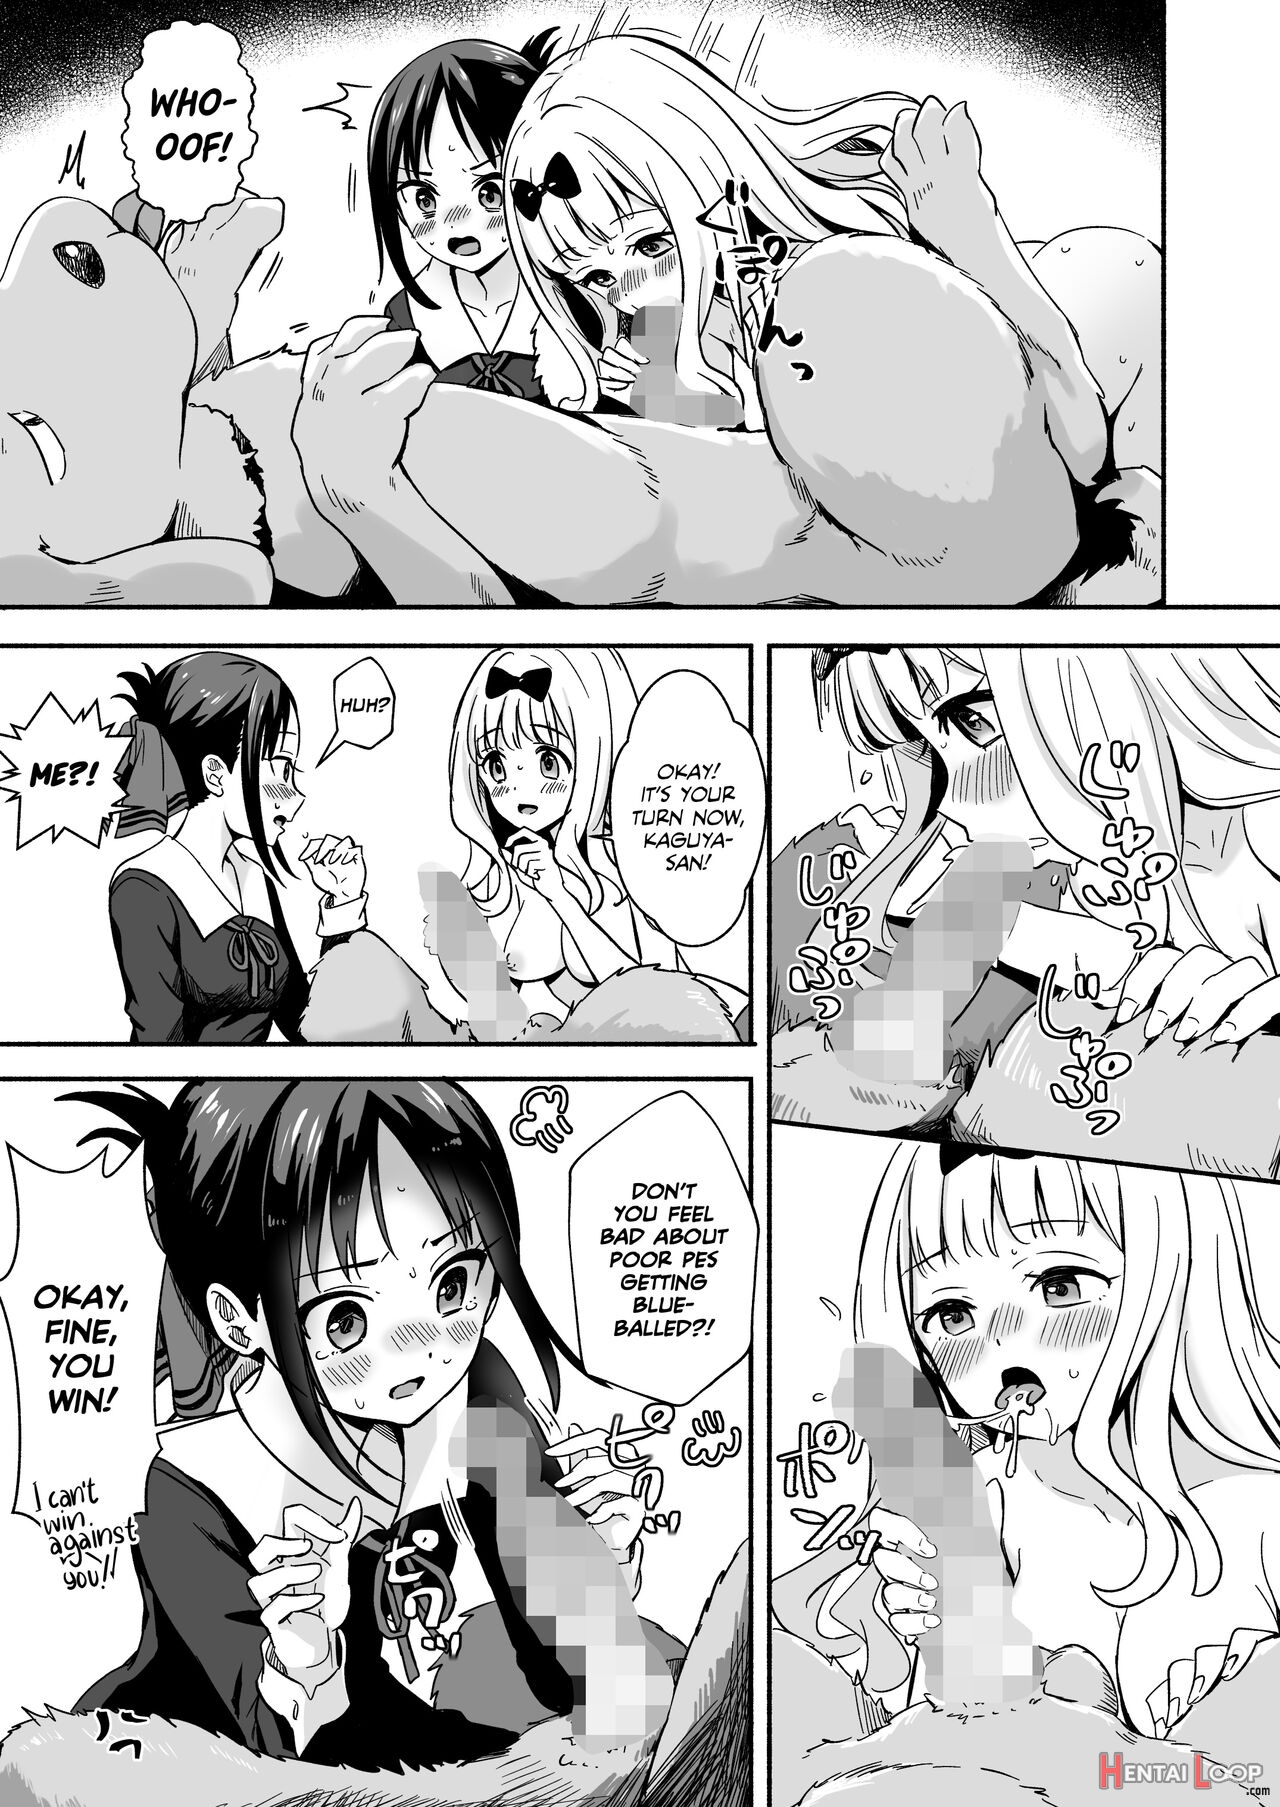 Kaguya-san Takes Care Of Pes's Sexual Urges! page 14